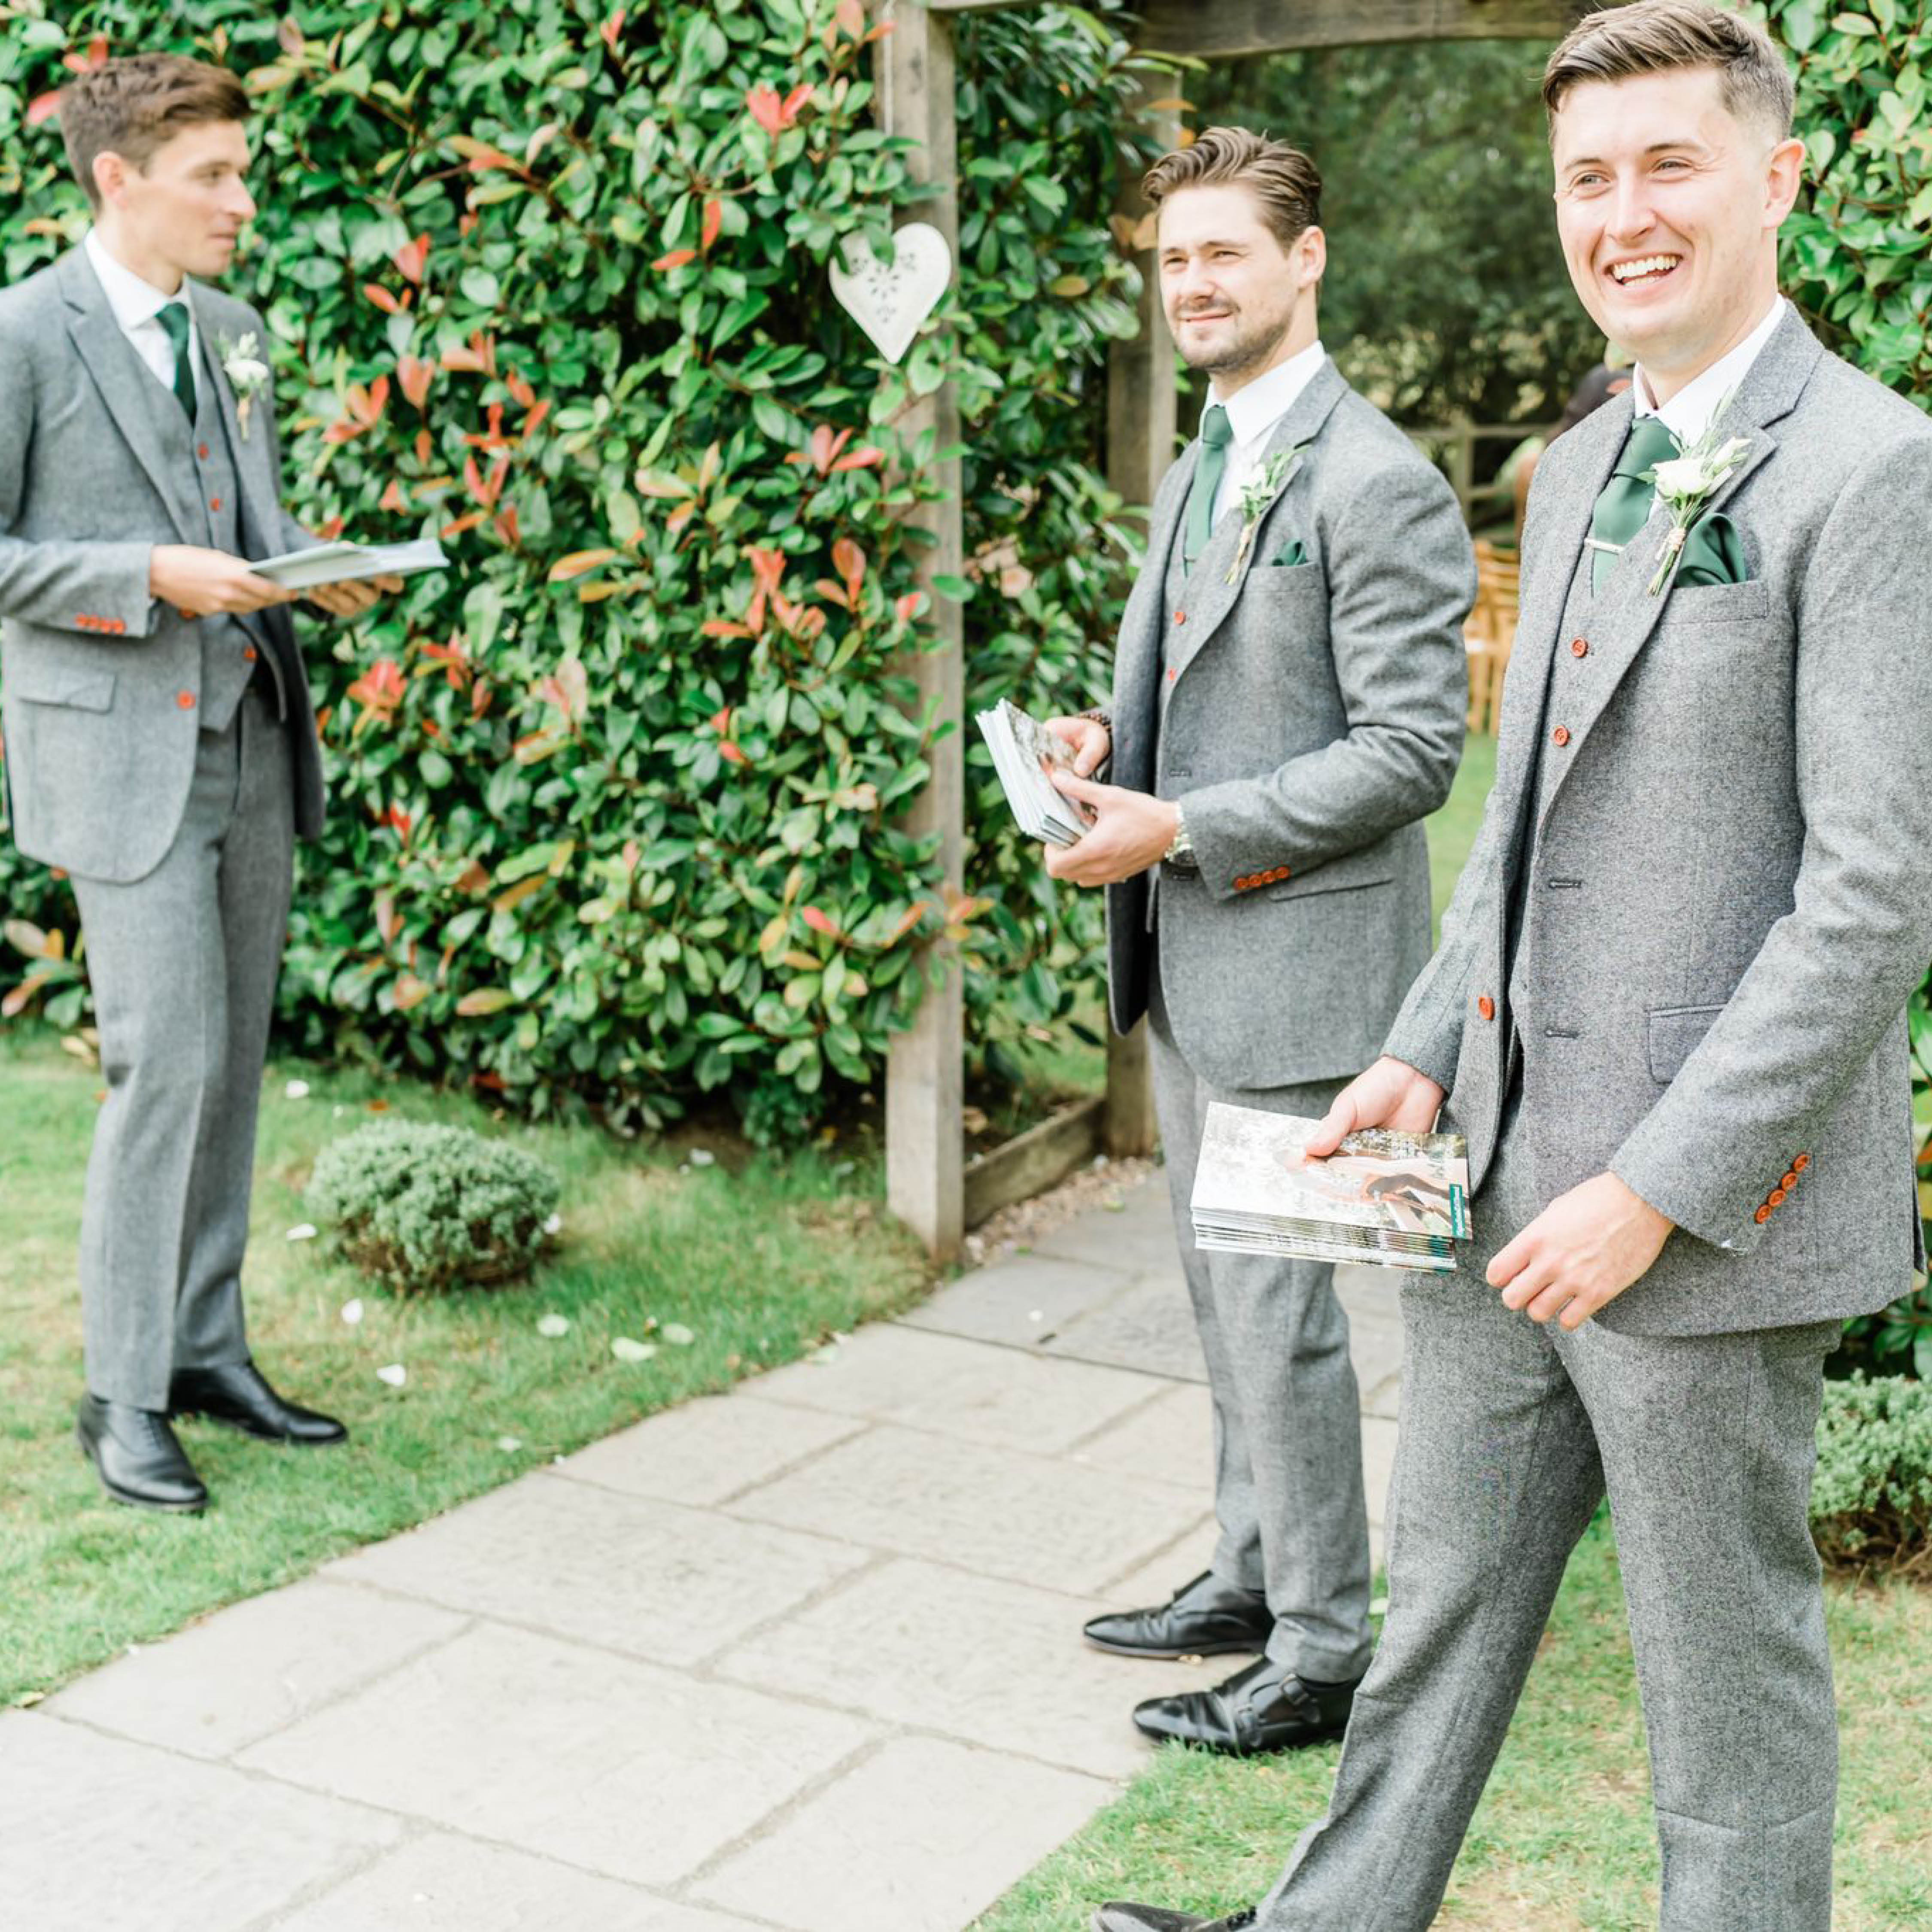 How to pick the perfect groomsmen for your wedding, wedding party